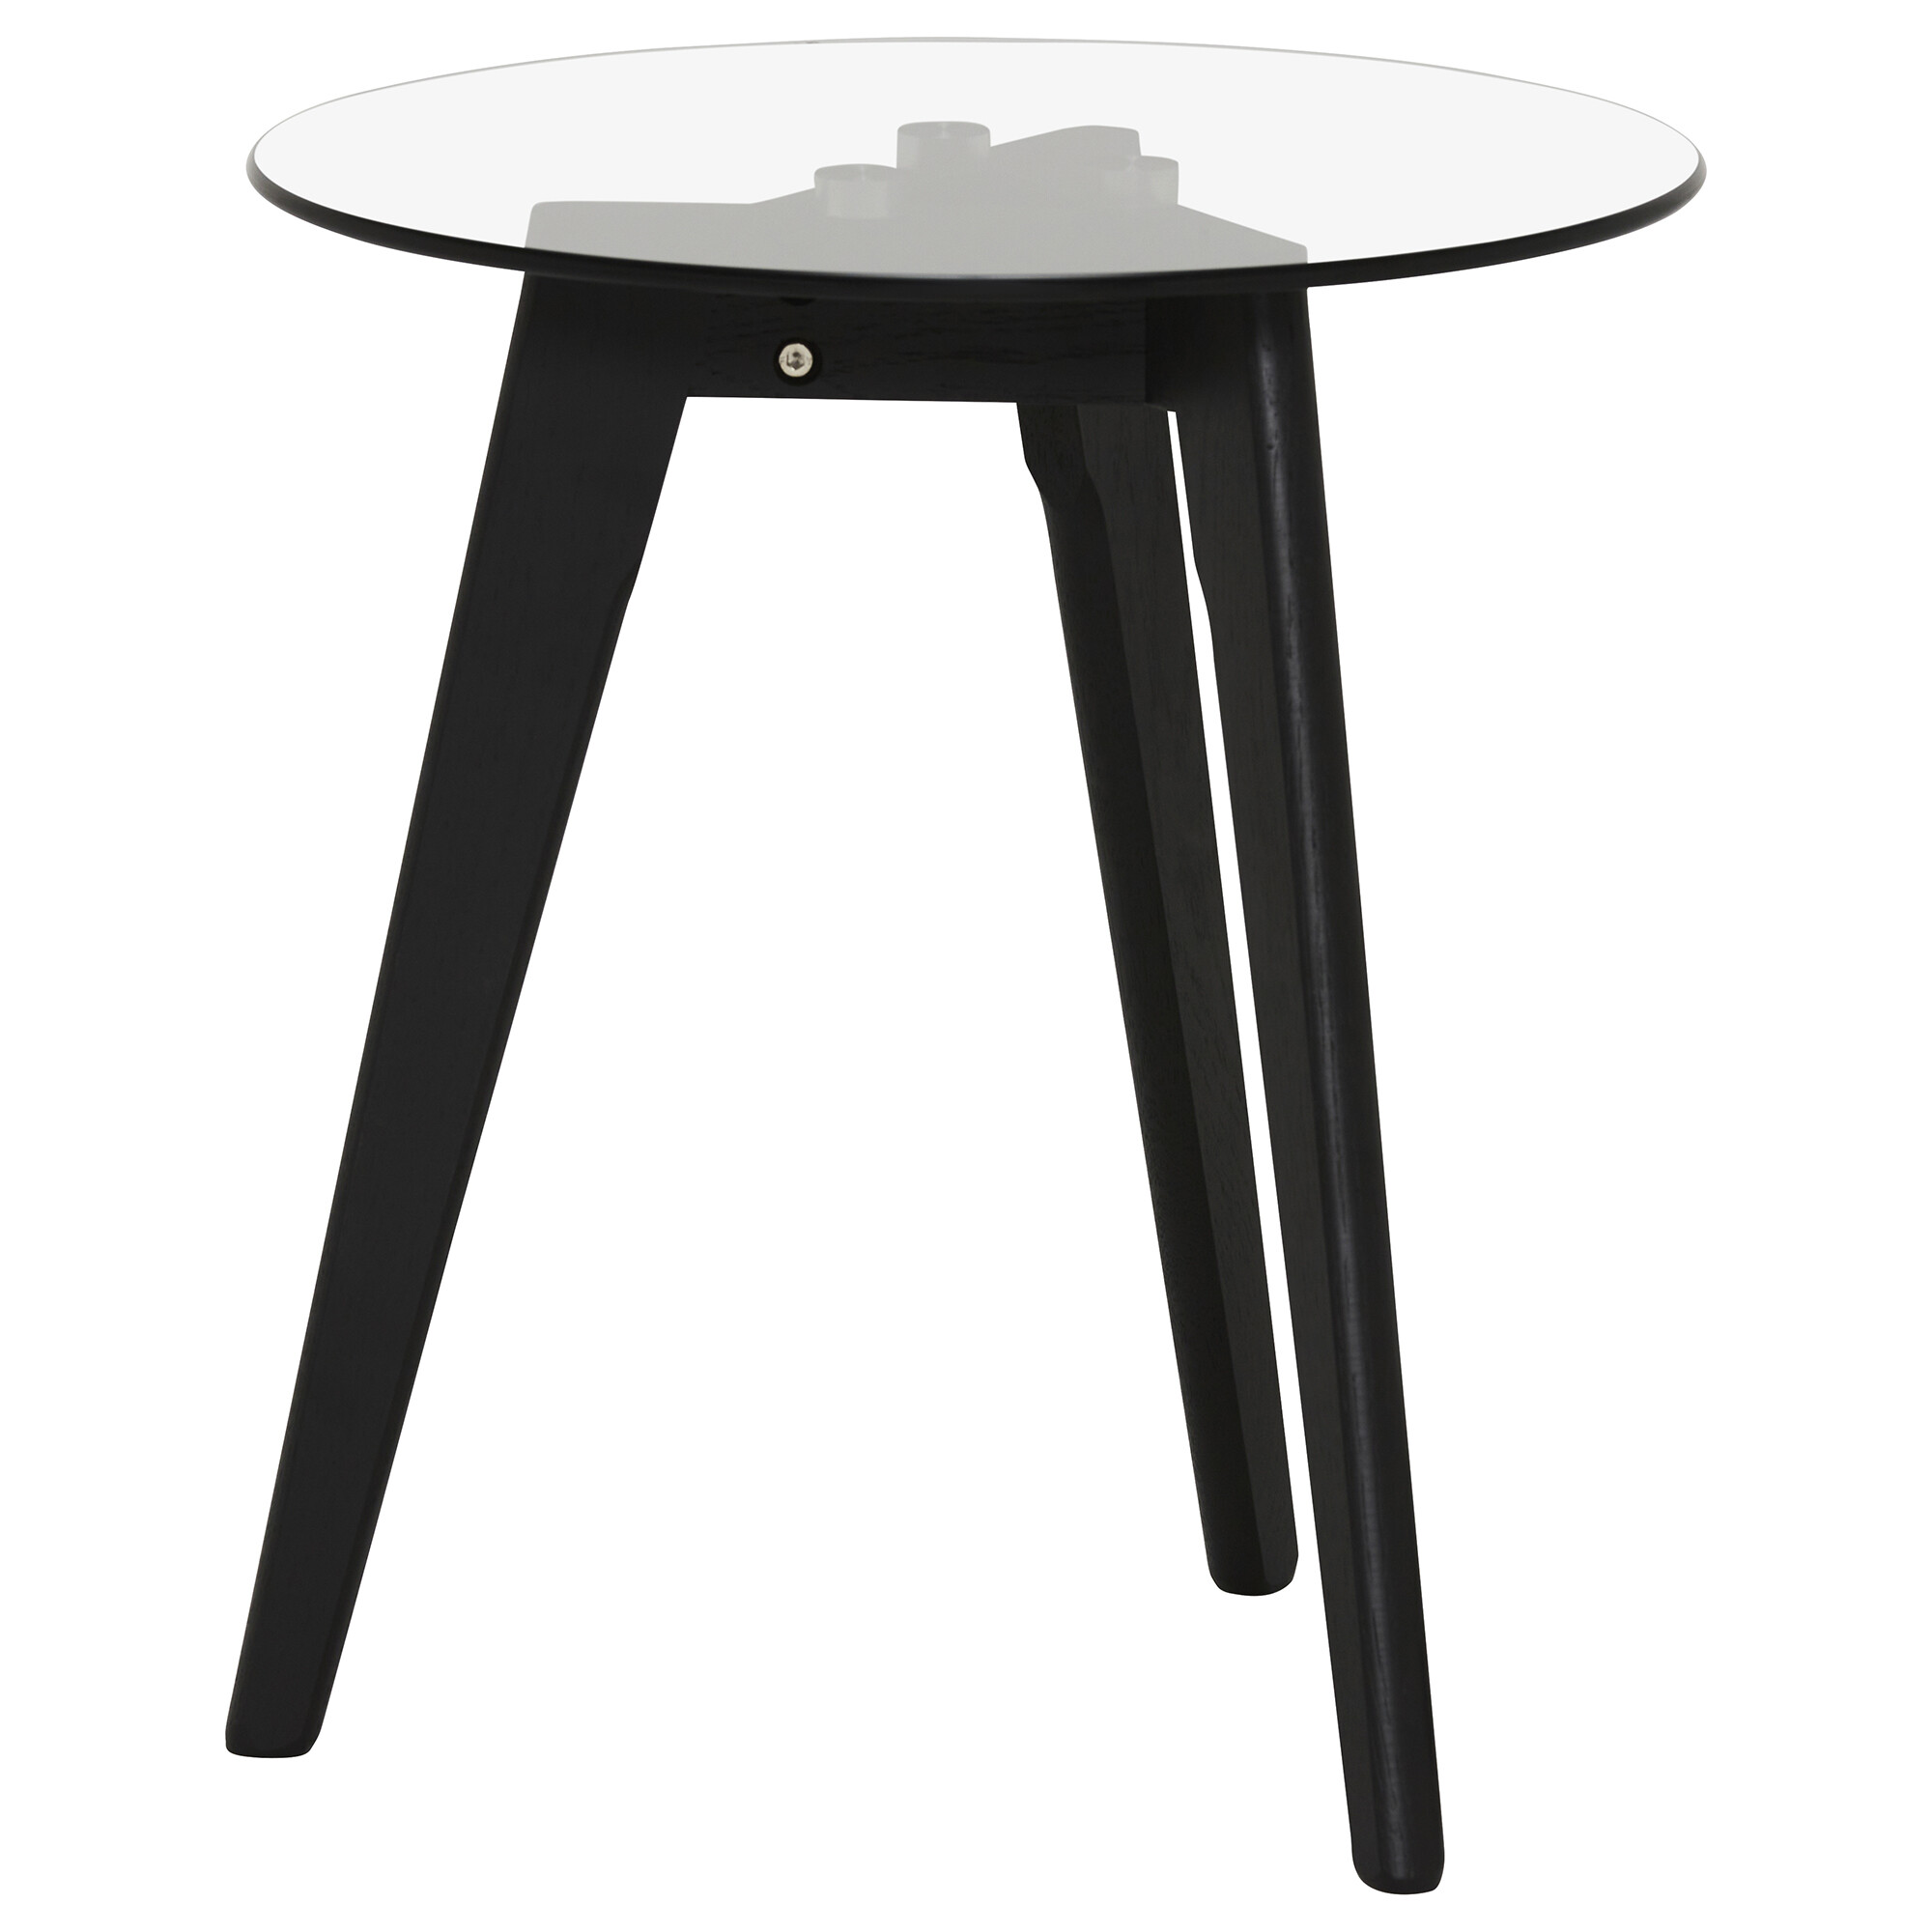 Photo of Aries round side table in black